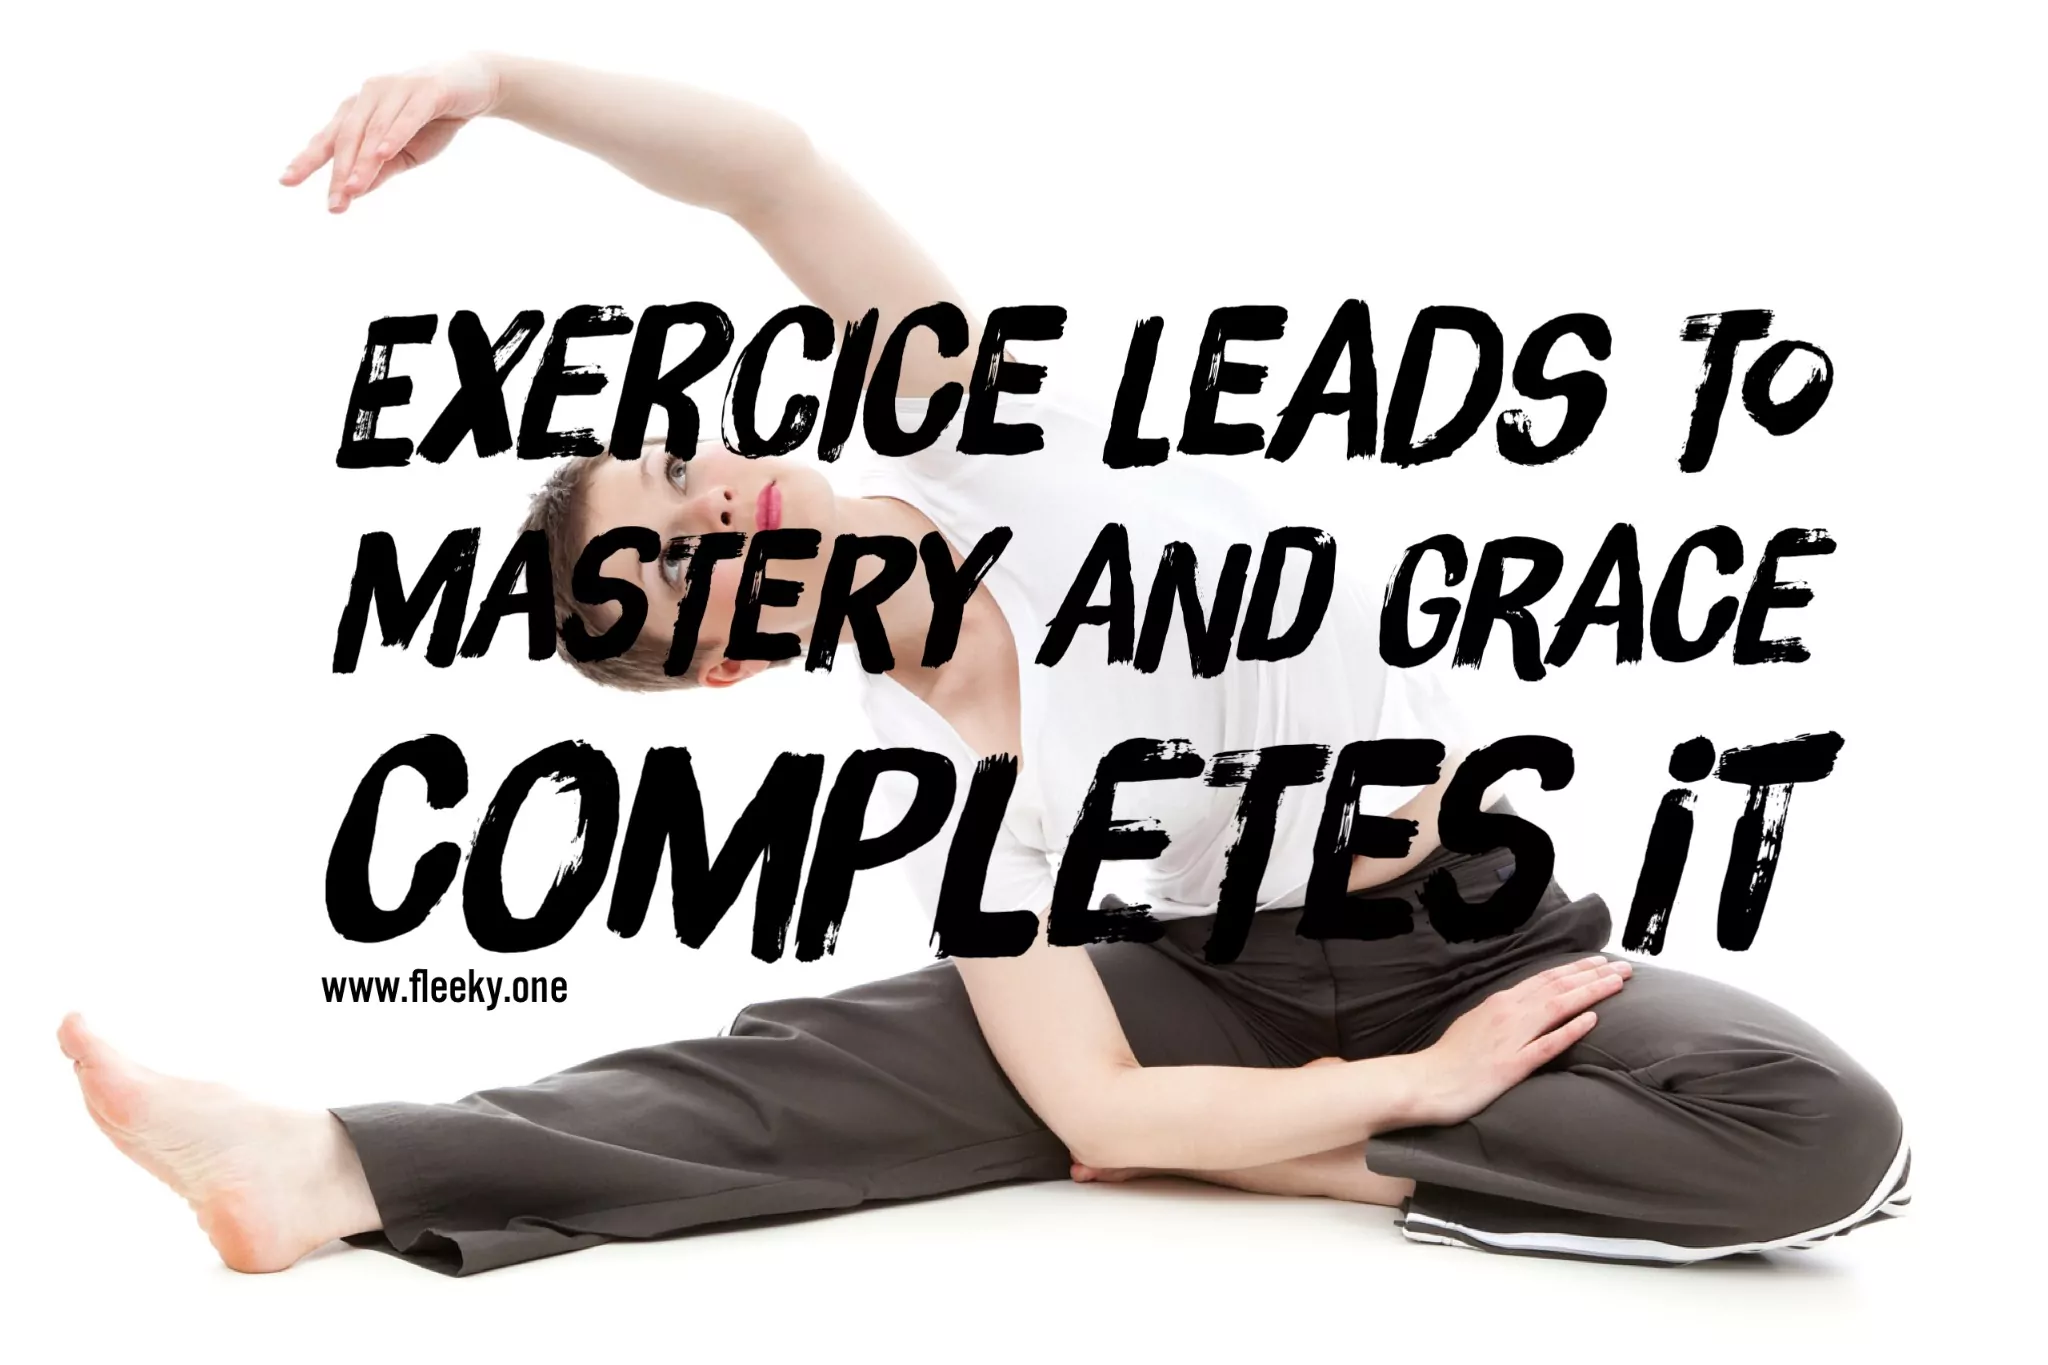 Exercice and mastery, fitness and grace